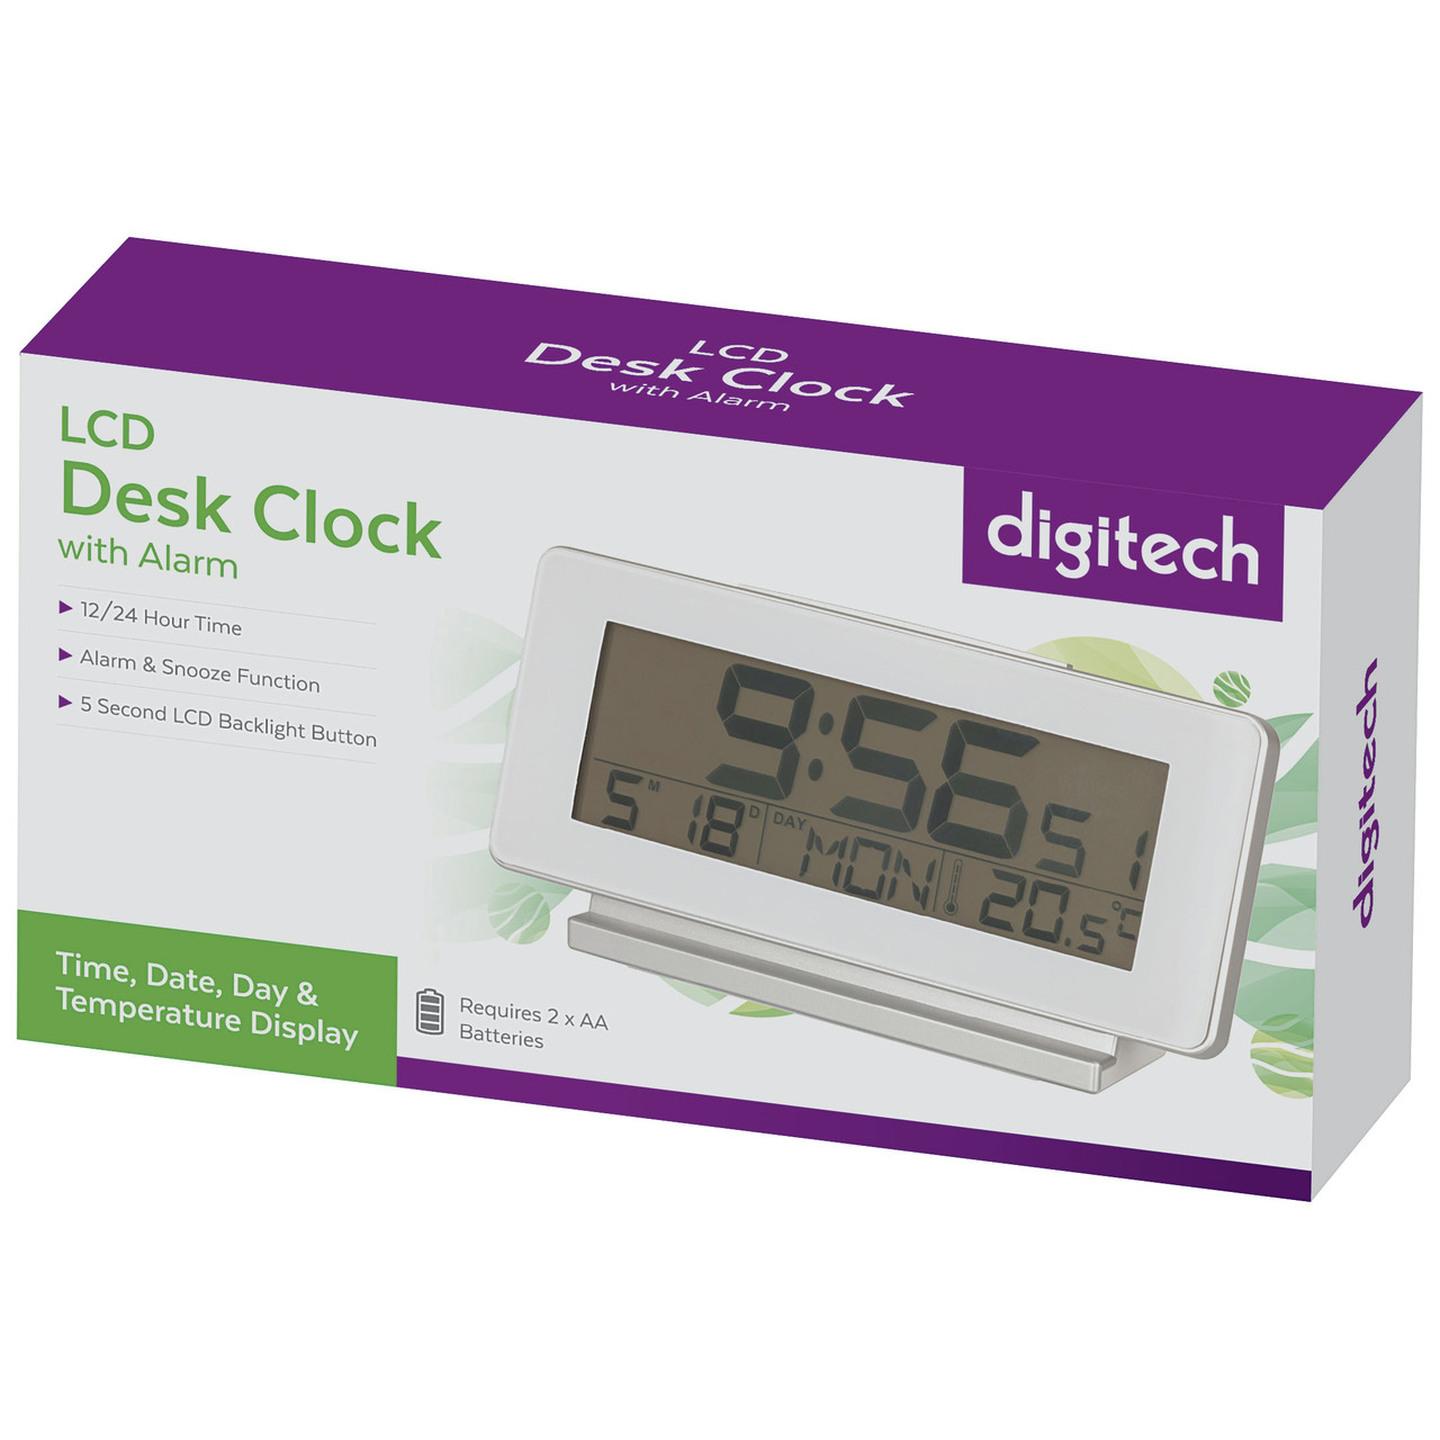 LCD Desk Clock with Alarm